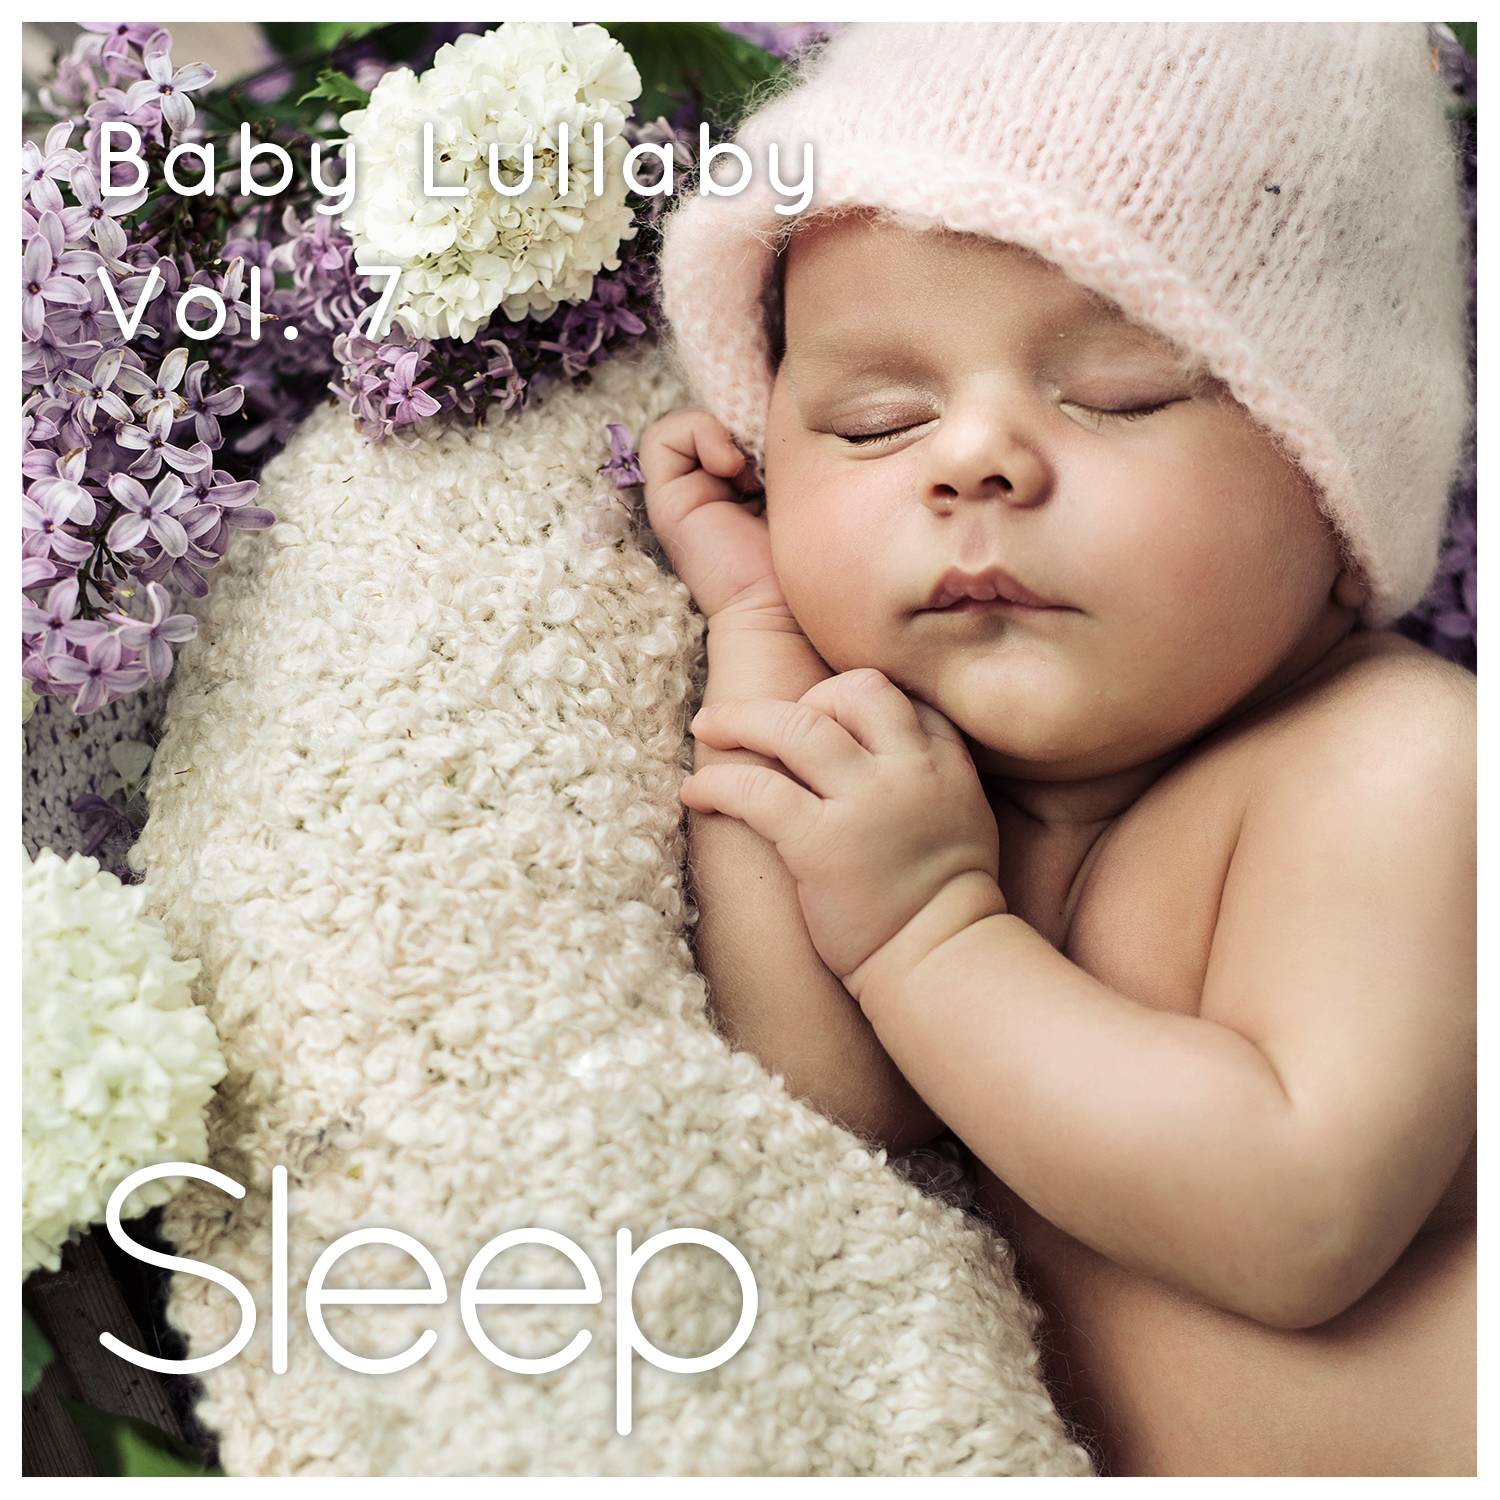 Baby Sleep Ambient Lullaby, Pt. 31